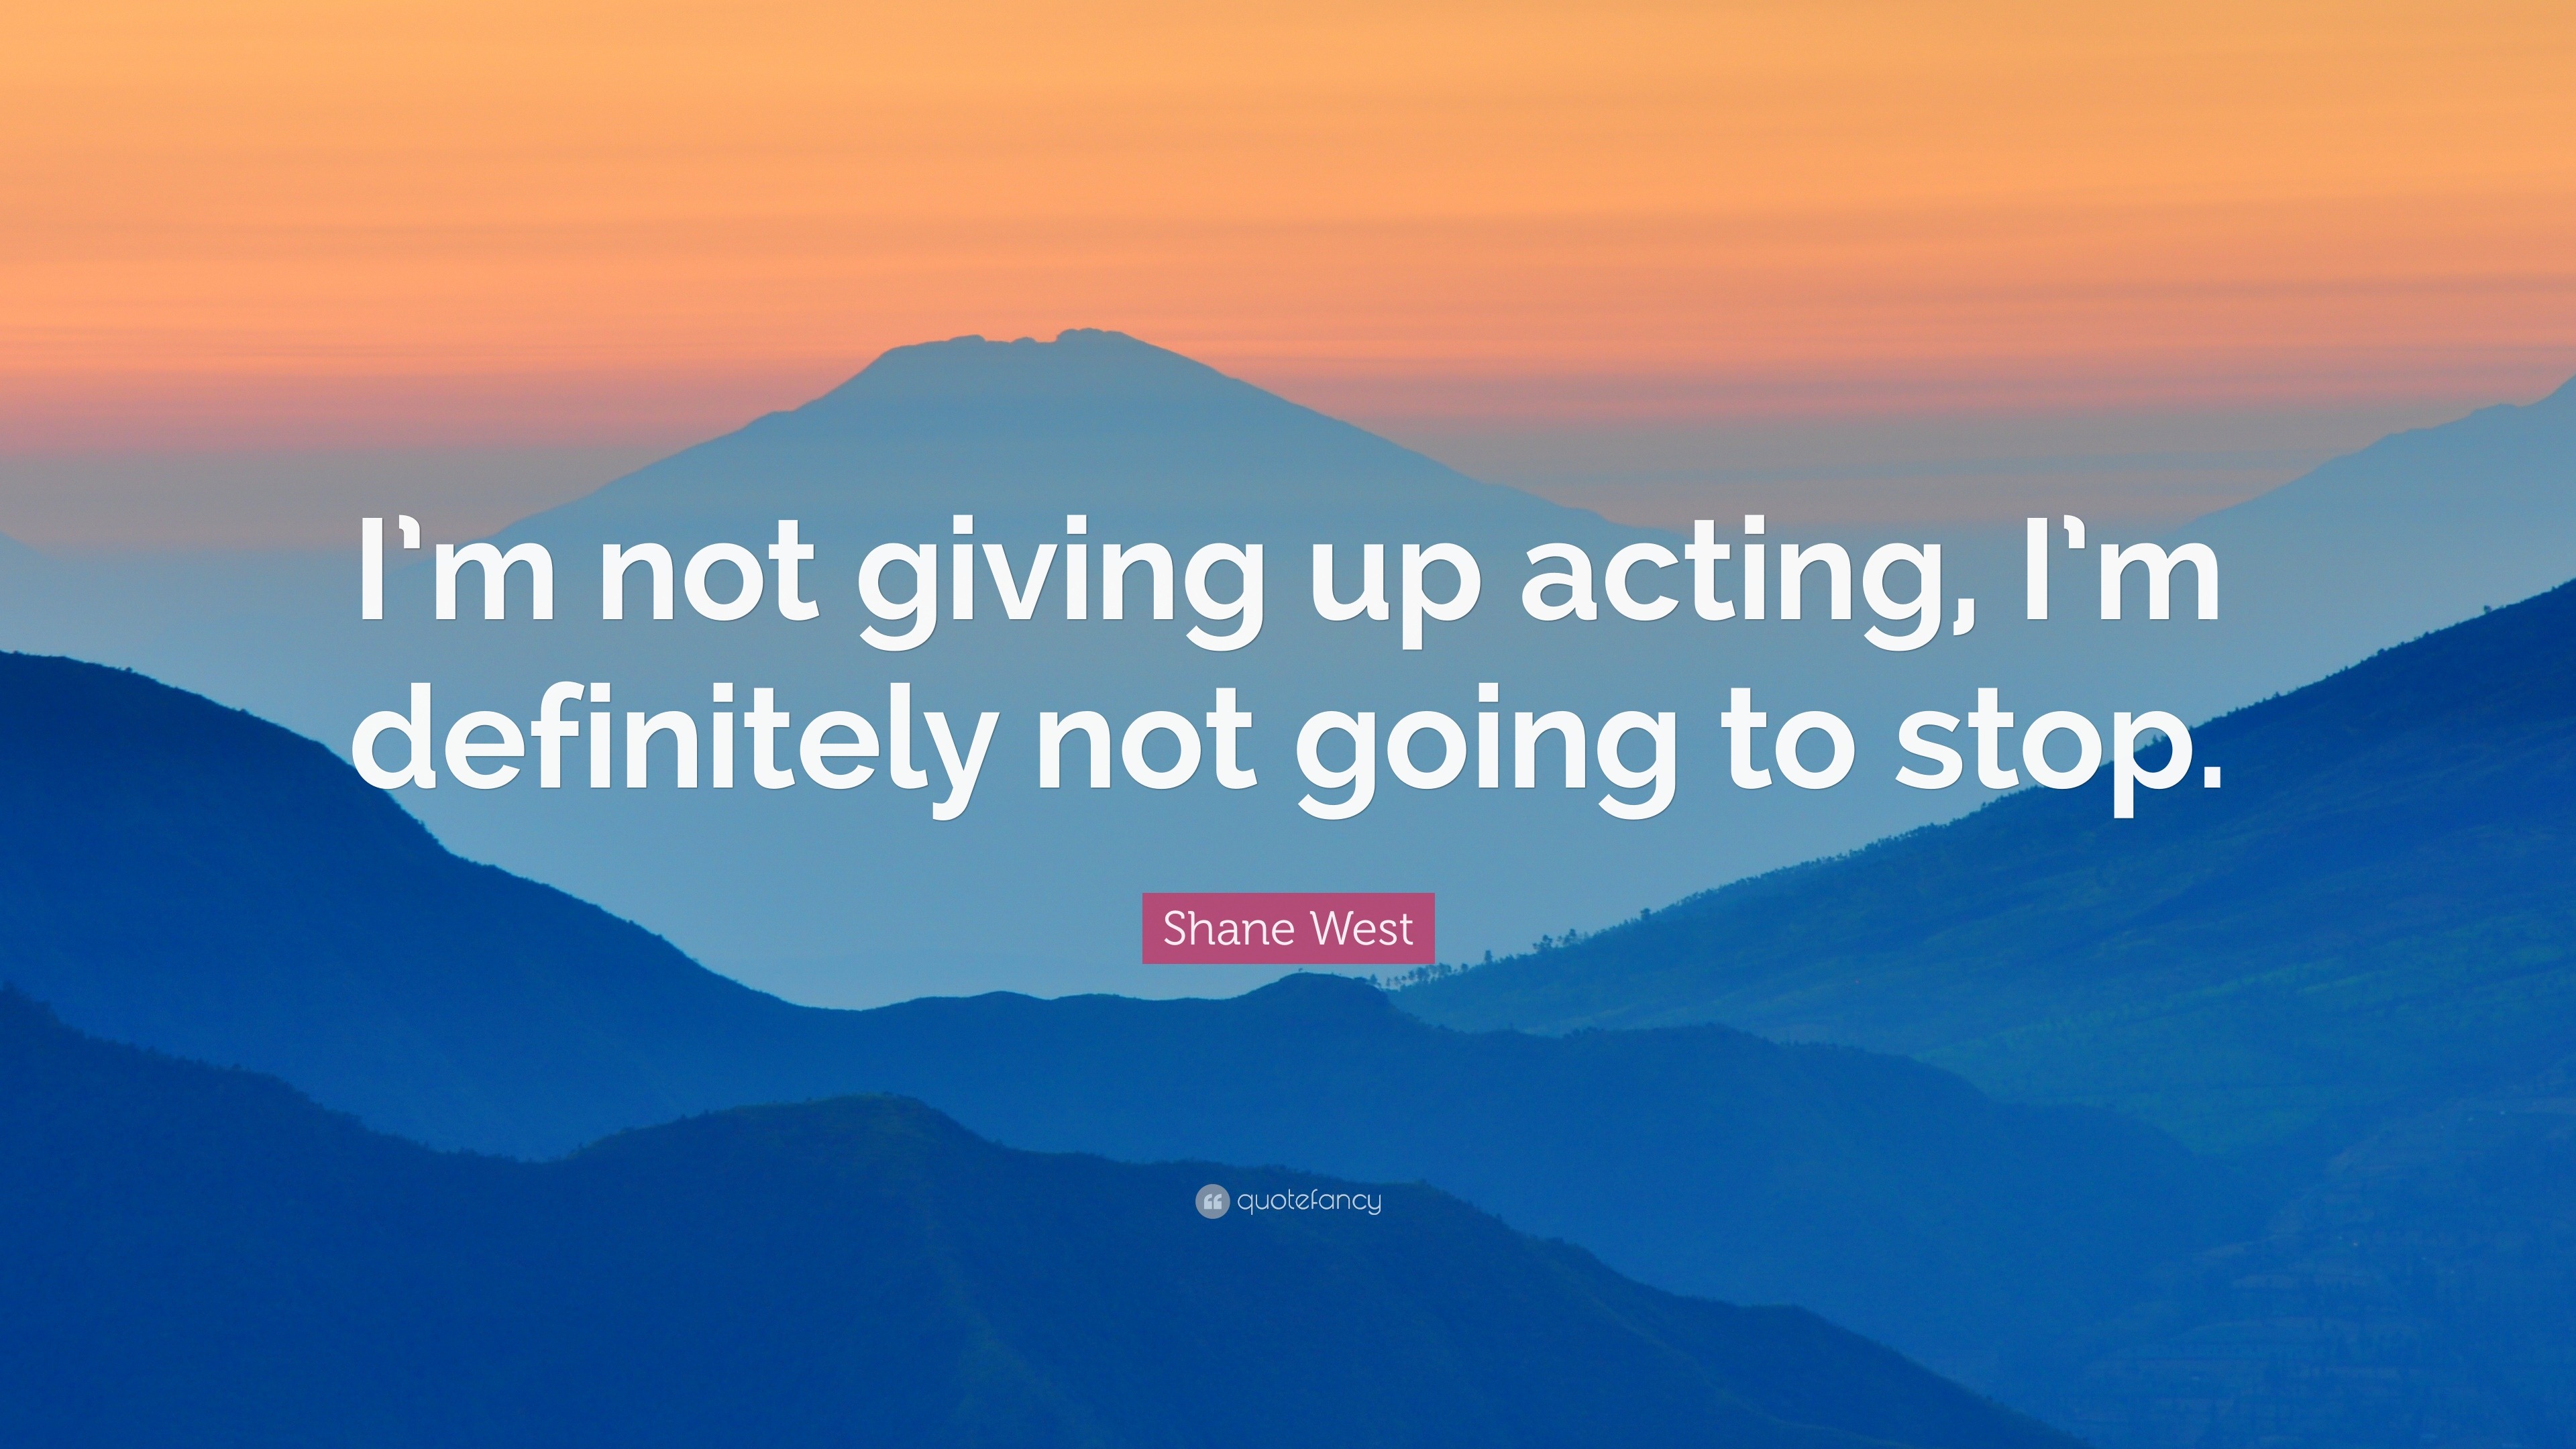 Shane West Quote: “I’m not giving up acting, I’m definitely not going ...